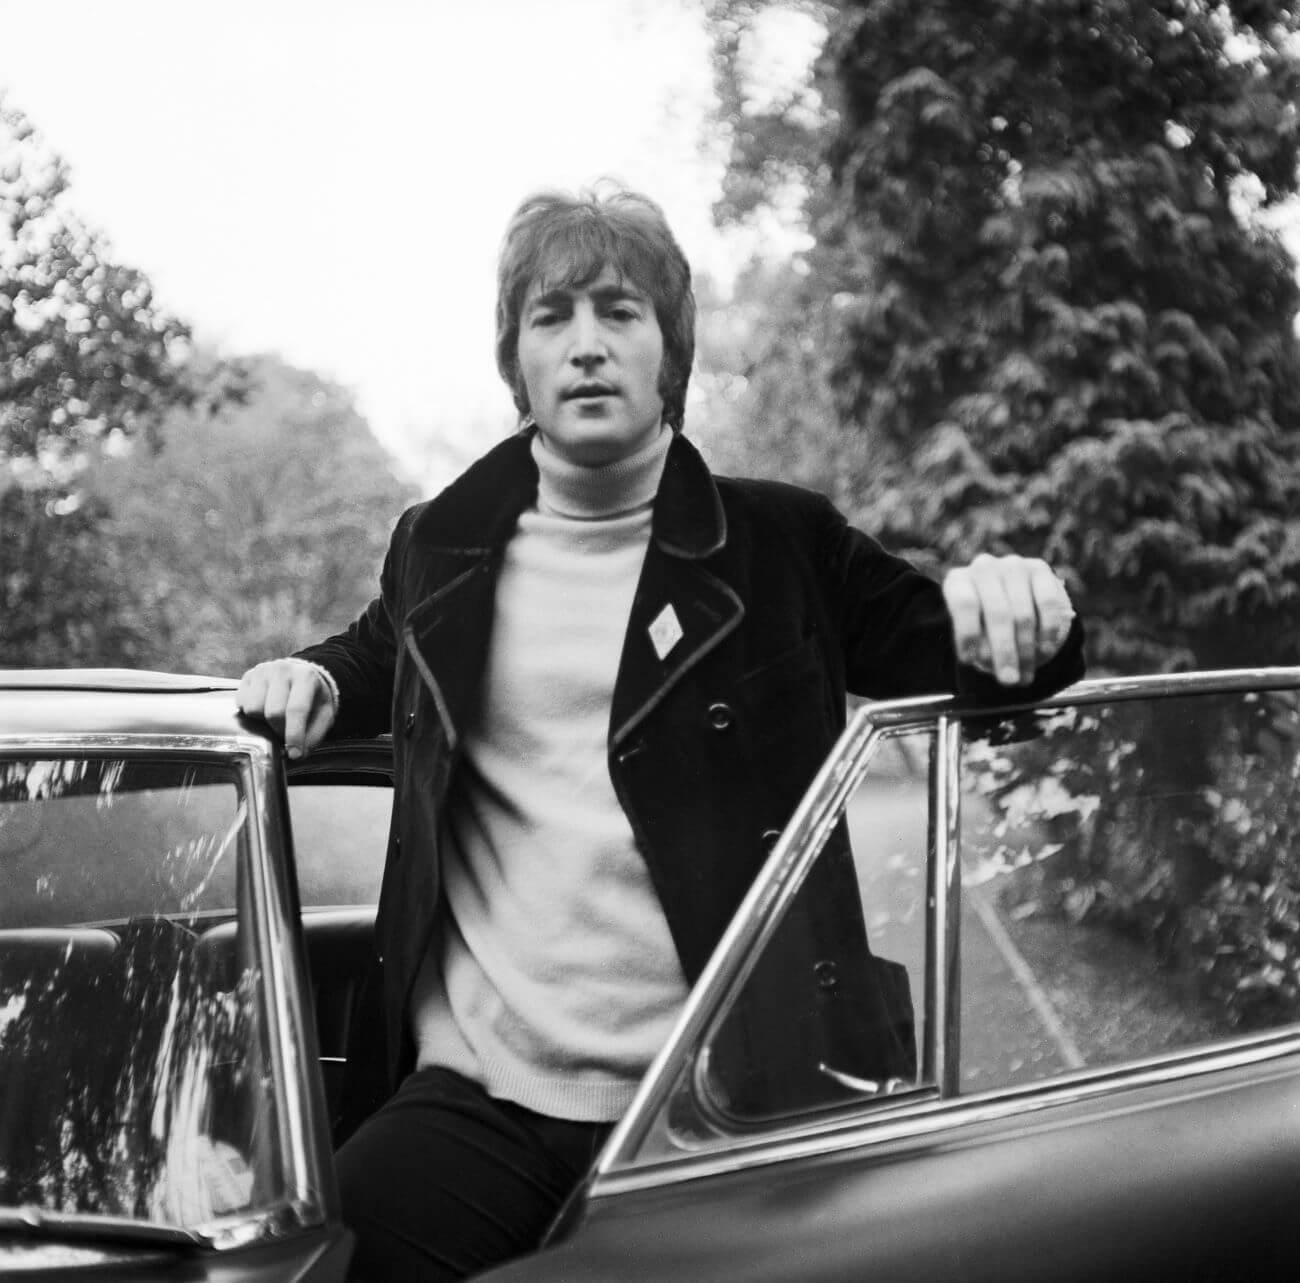 A black and white picture of John Lennon, one of the musicians in The Beatles, standing behind an open car door.